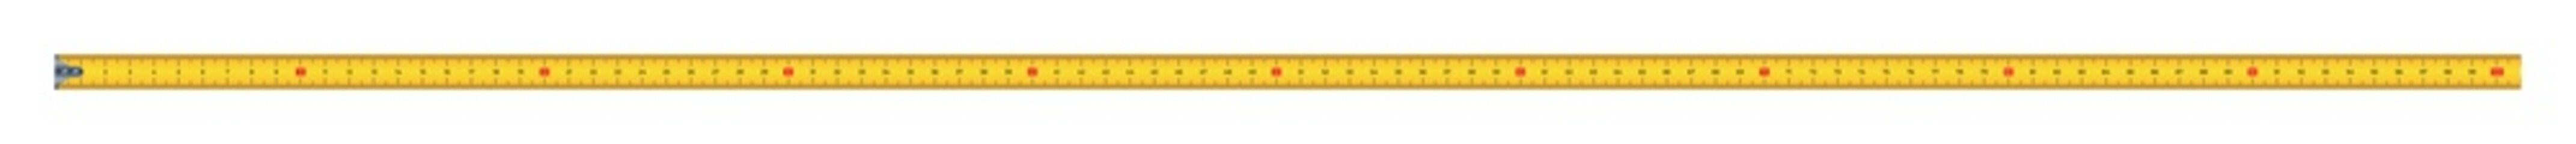 Vector illustration yellow and black measure tape ruler 100 cm isolated on white background. Realistic tape for tool roulette in flat style. Metric measurement.